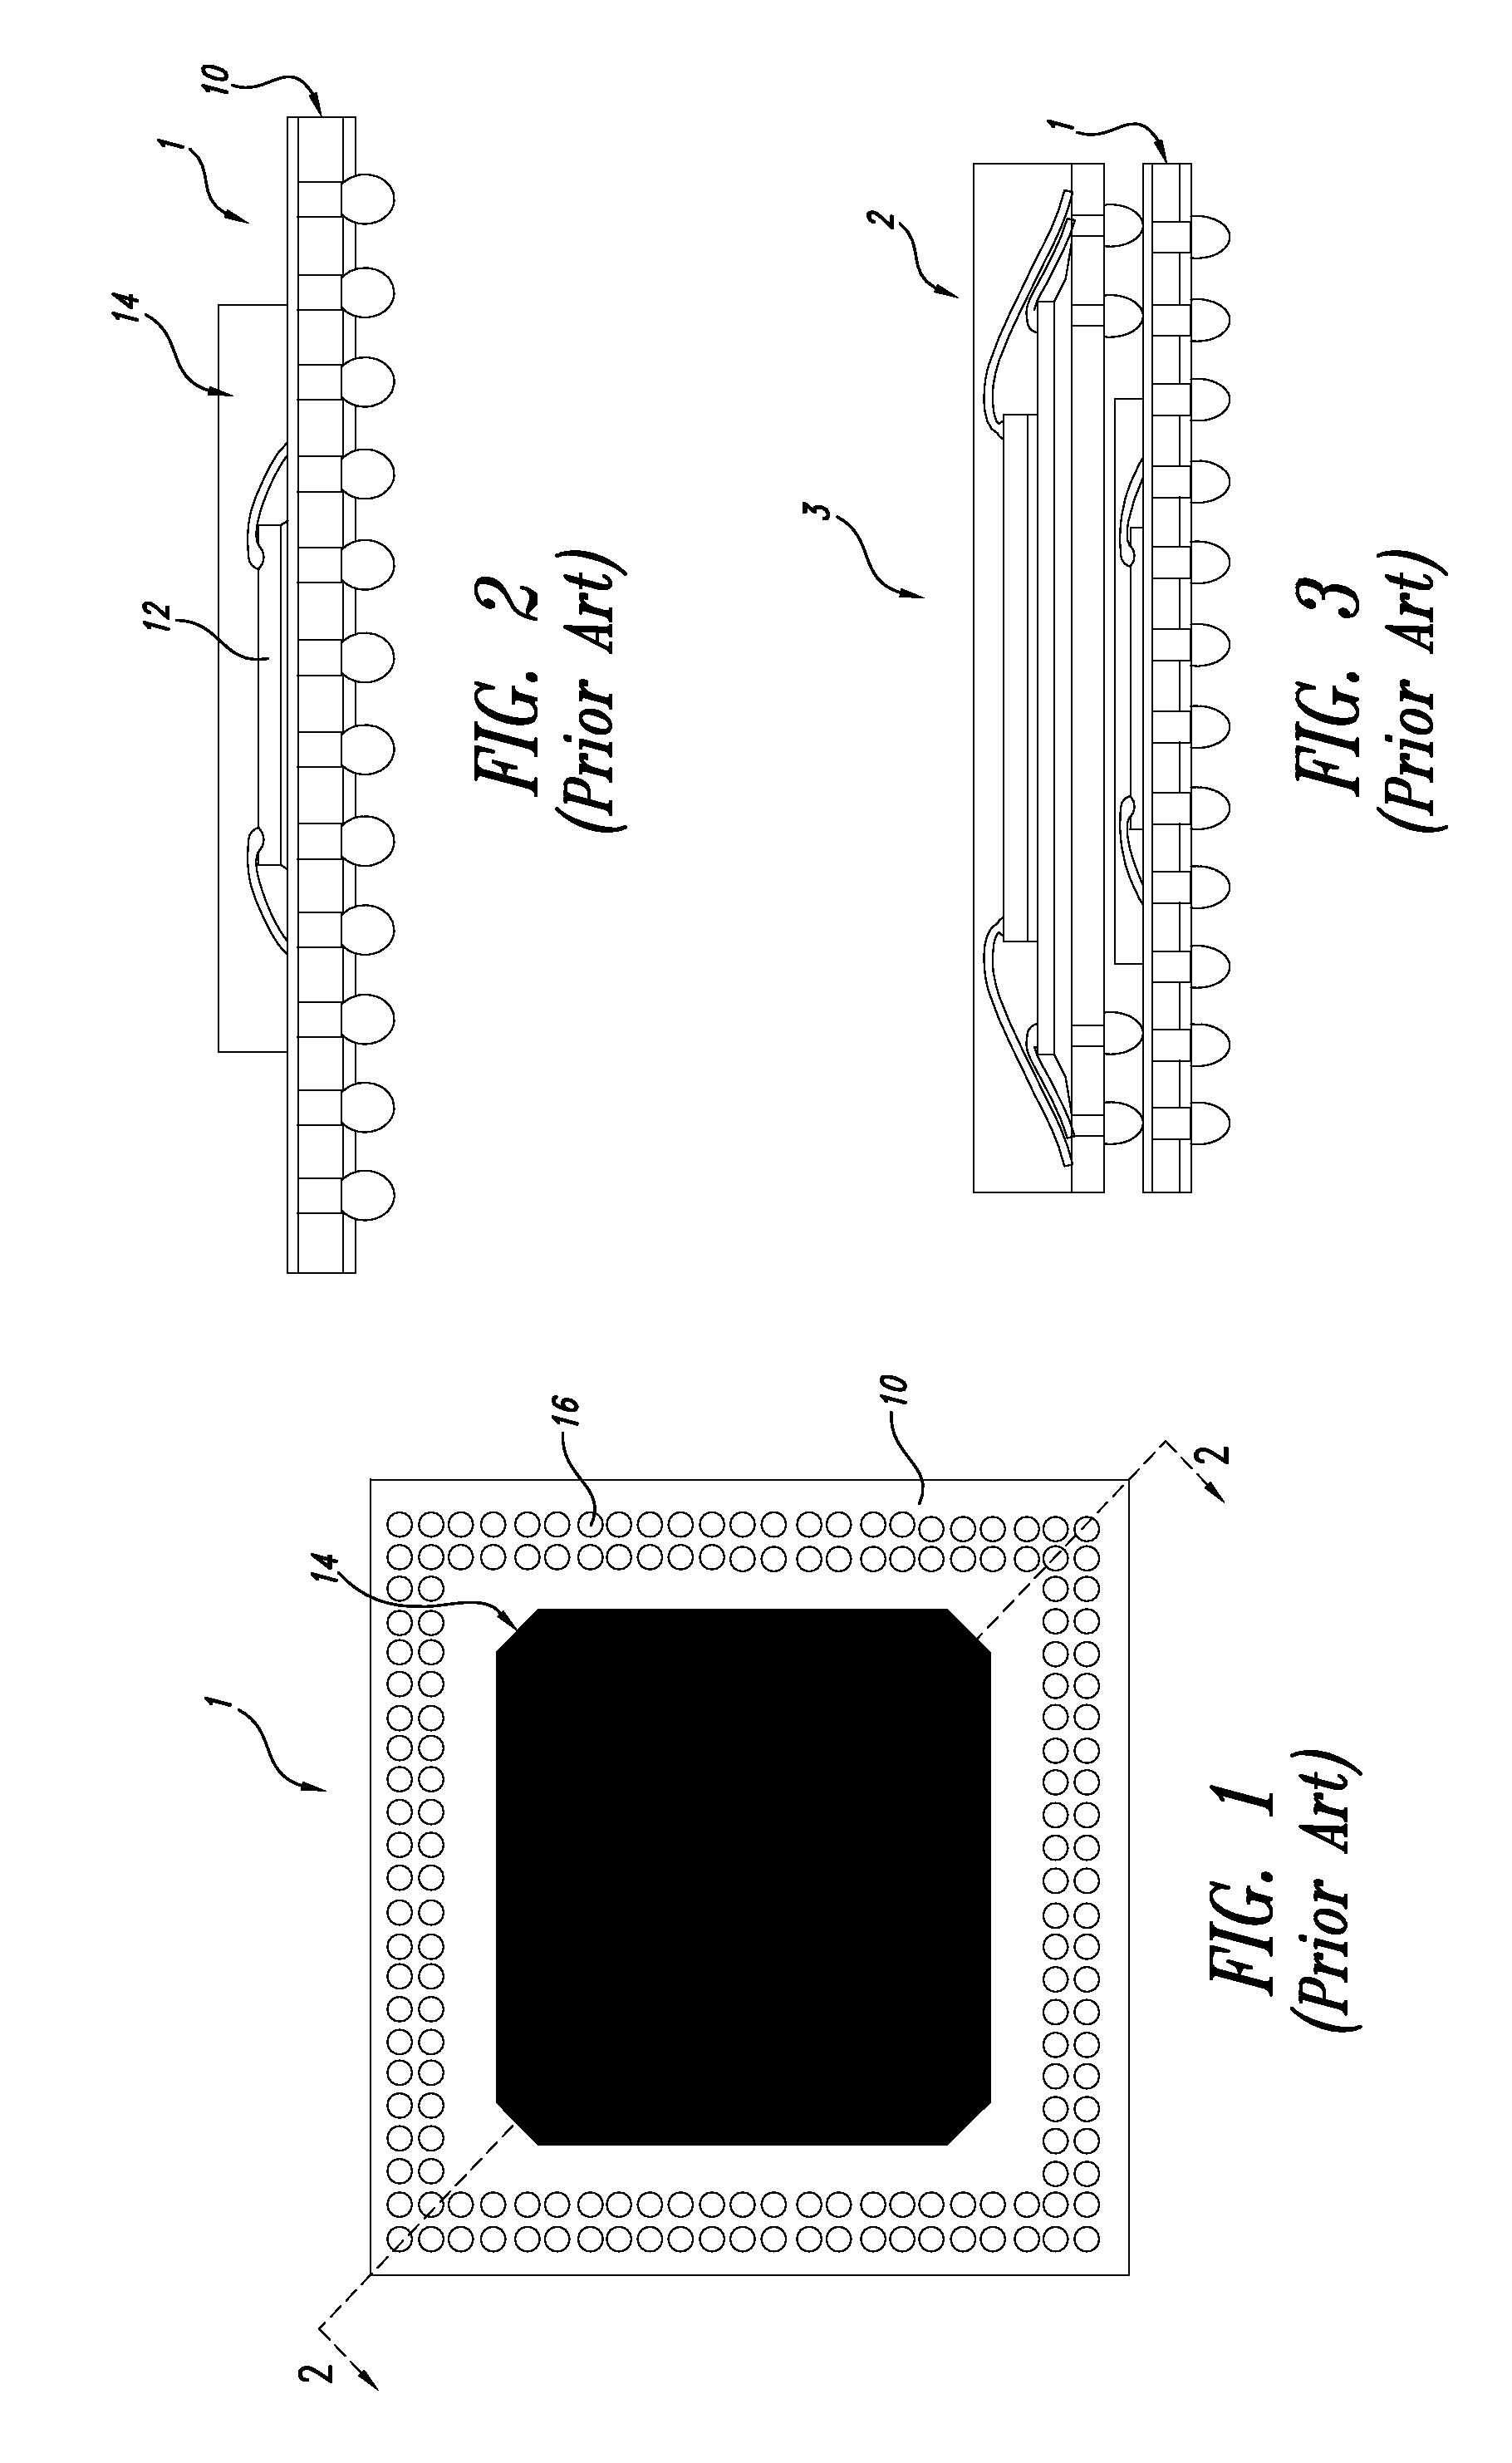 Chip package with coplanarity controlling feature